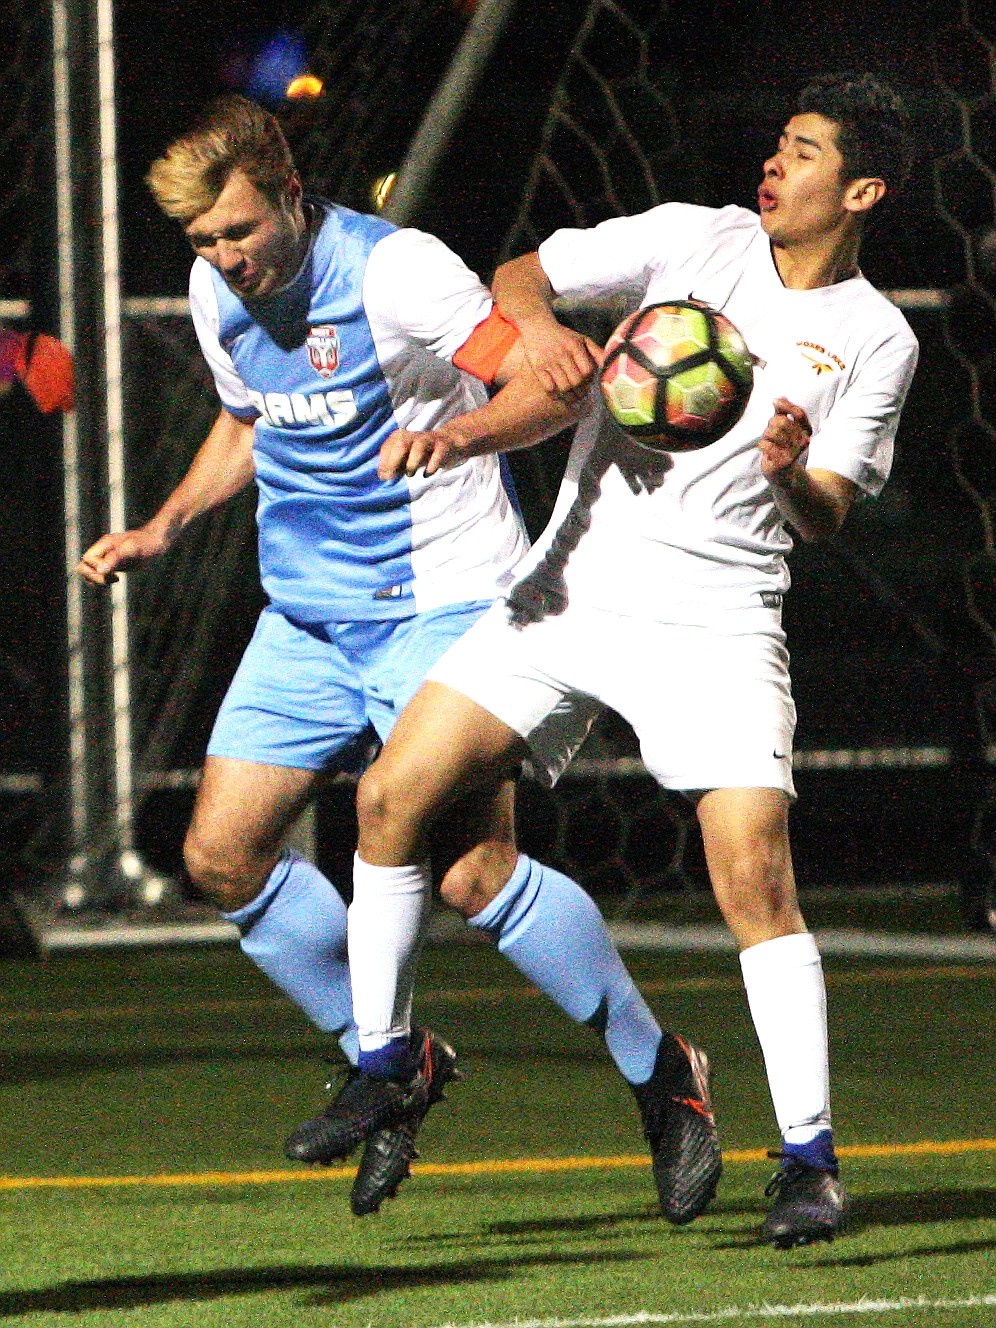 Rodney Harwood/Columbia Basin HeraldMoses Lake defender Josh Henriquez (5) fights for possession in the box off a corner kick with Kolbein Moore from West Valley. The Chiefs won the match Friday night at Lions Field 2-1 in a shootout.